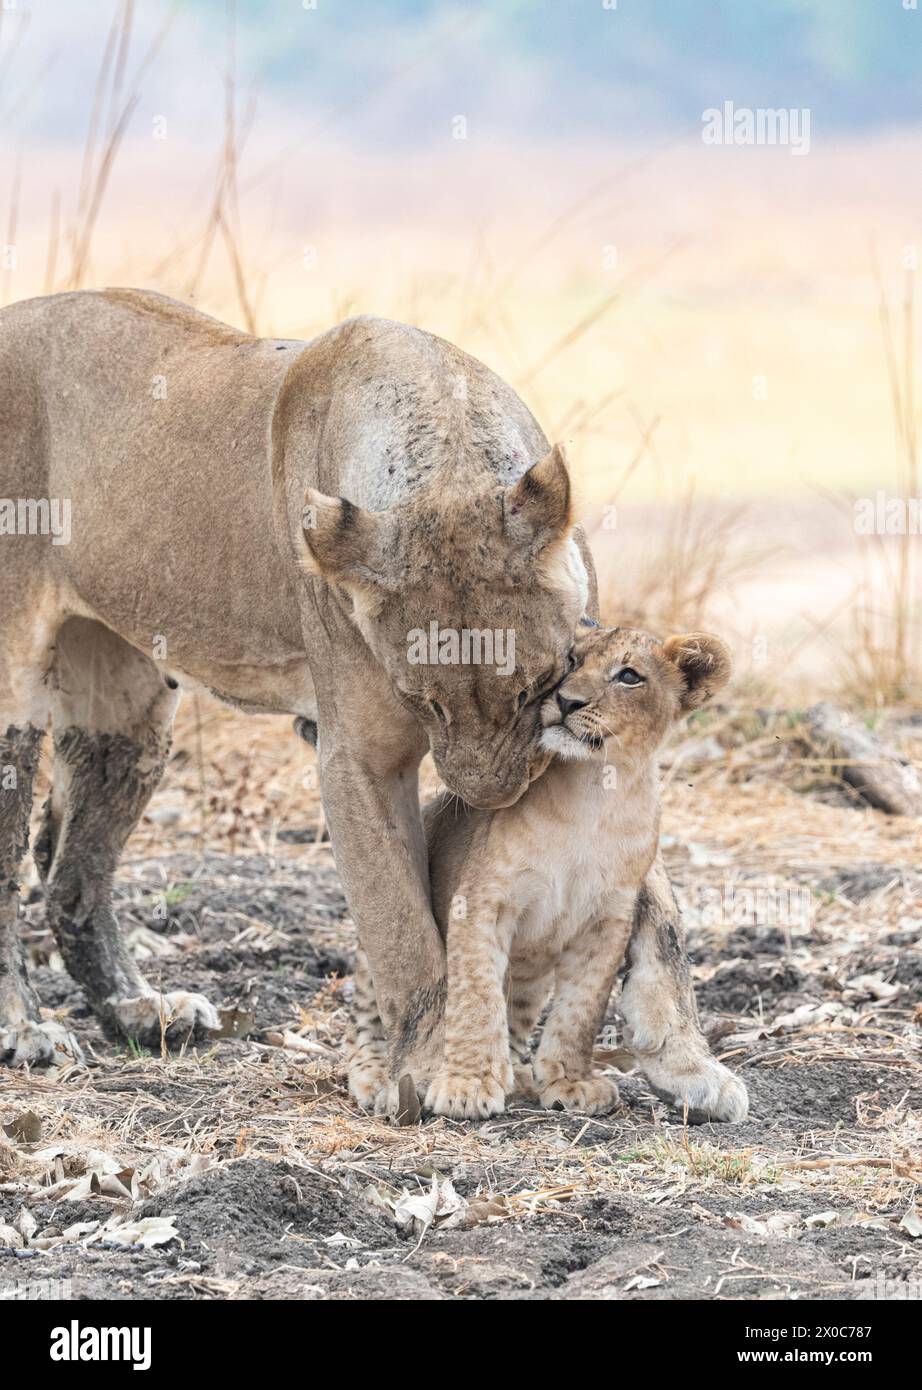 The pride is known as the Hollywood Pride because of their exceptionally good looks.      ZAMBIA ADORABLE images of a lioness showering her little one Stock Photo